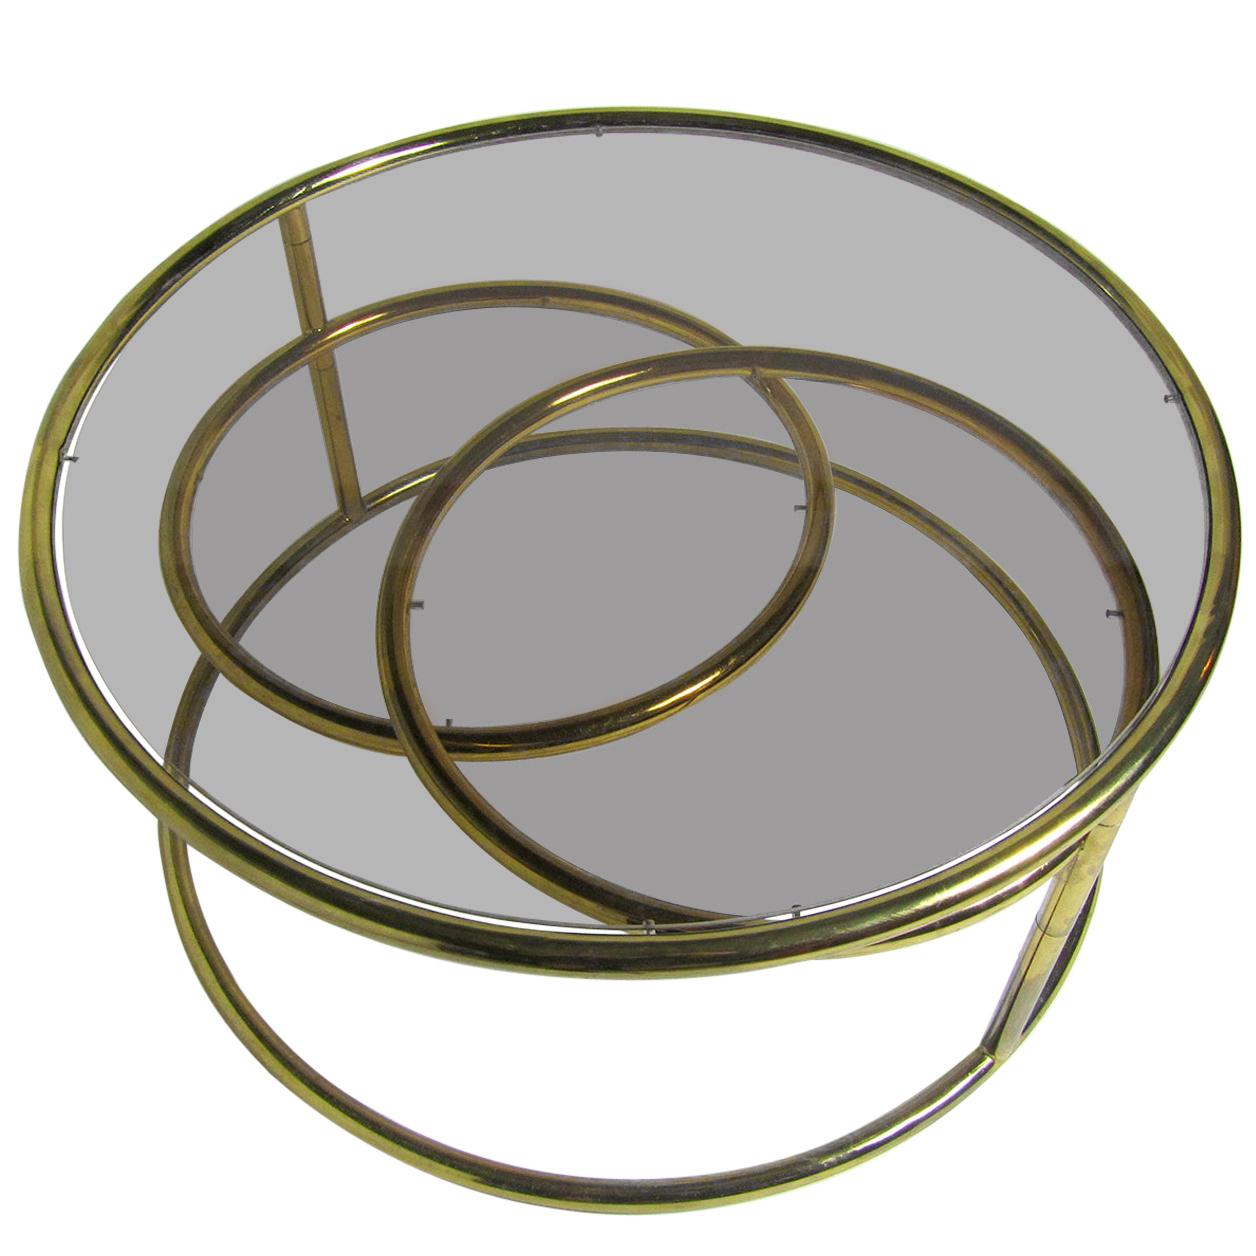 American Modern Brass and Smoked Glass 3 Ring Coffee Table by Milo Baughman